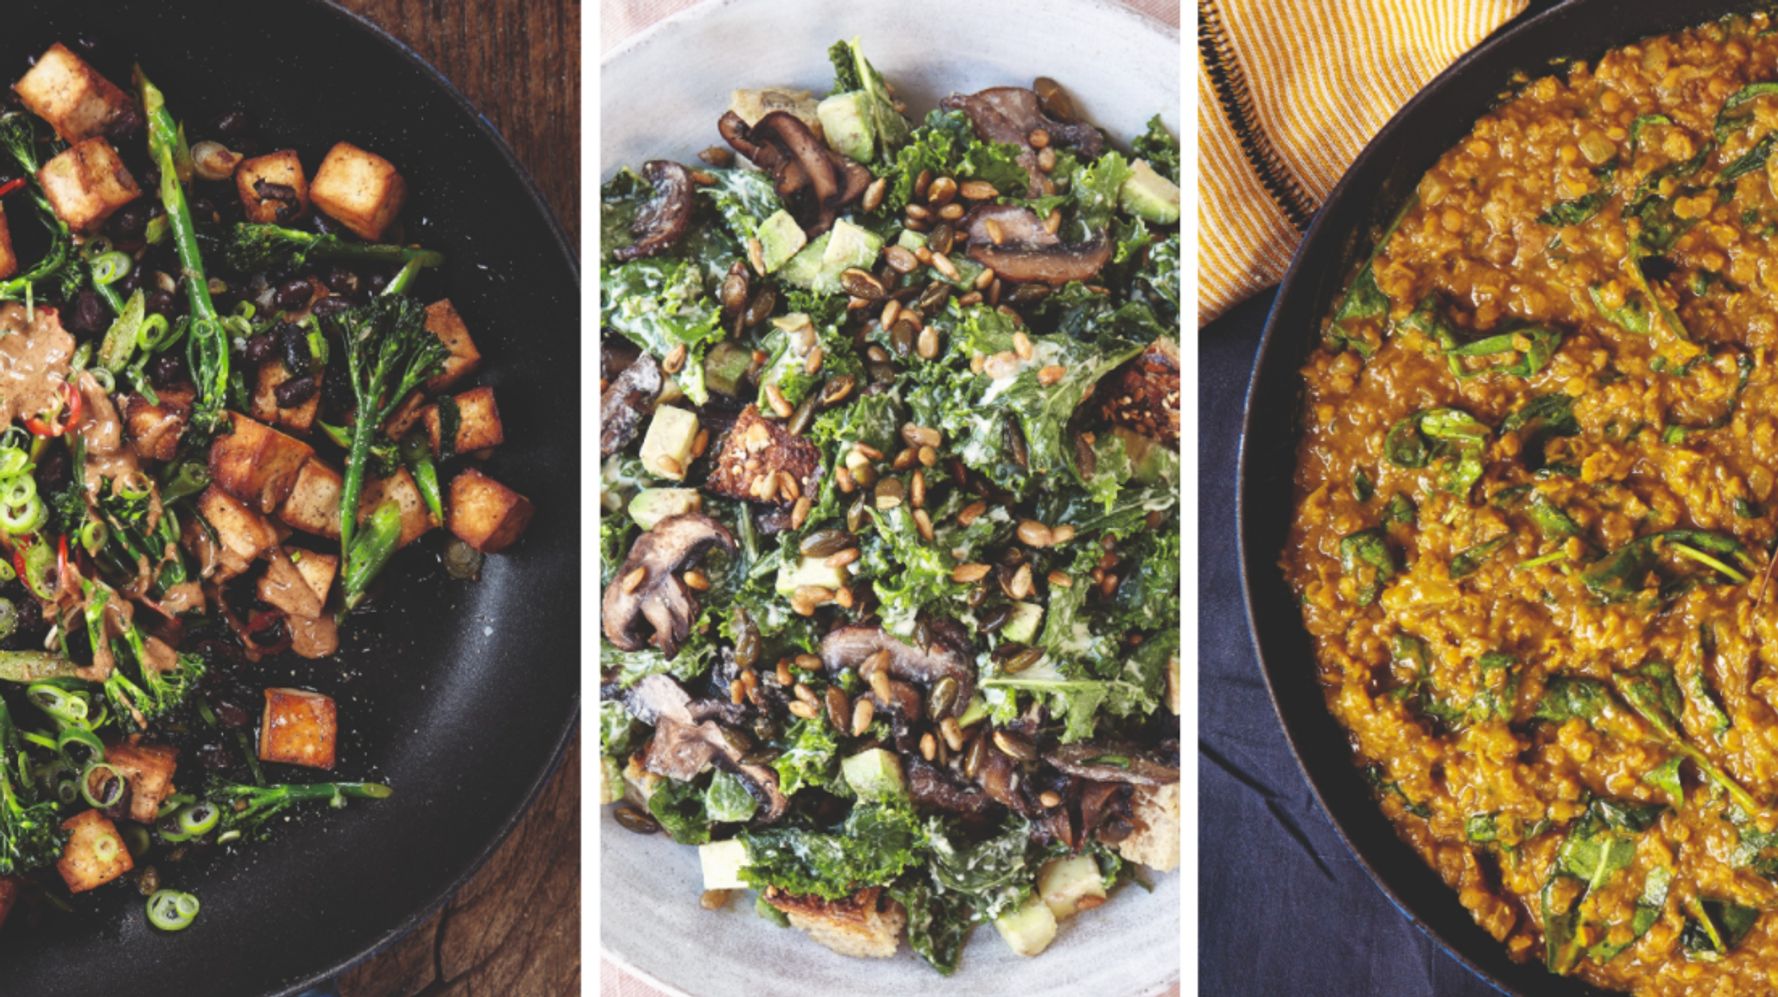 3 Quick And Easy Vegan Recipes That'll Make You A Believer In Plant-Based Food